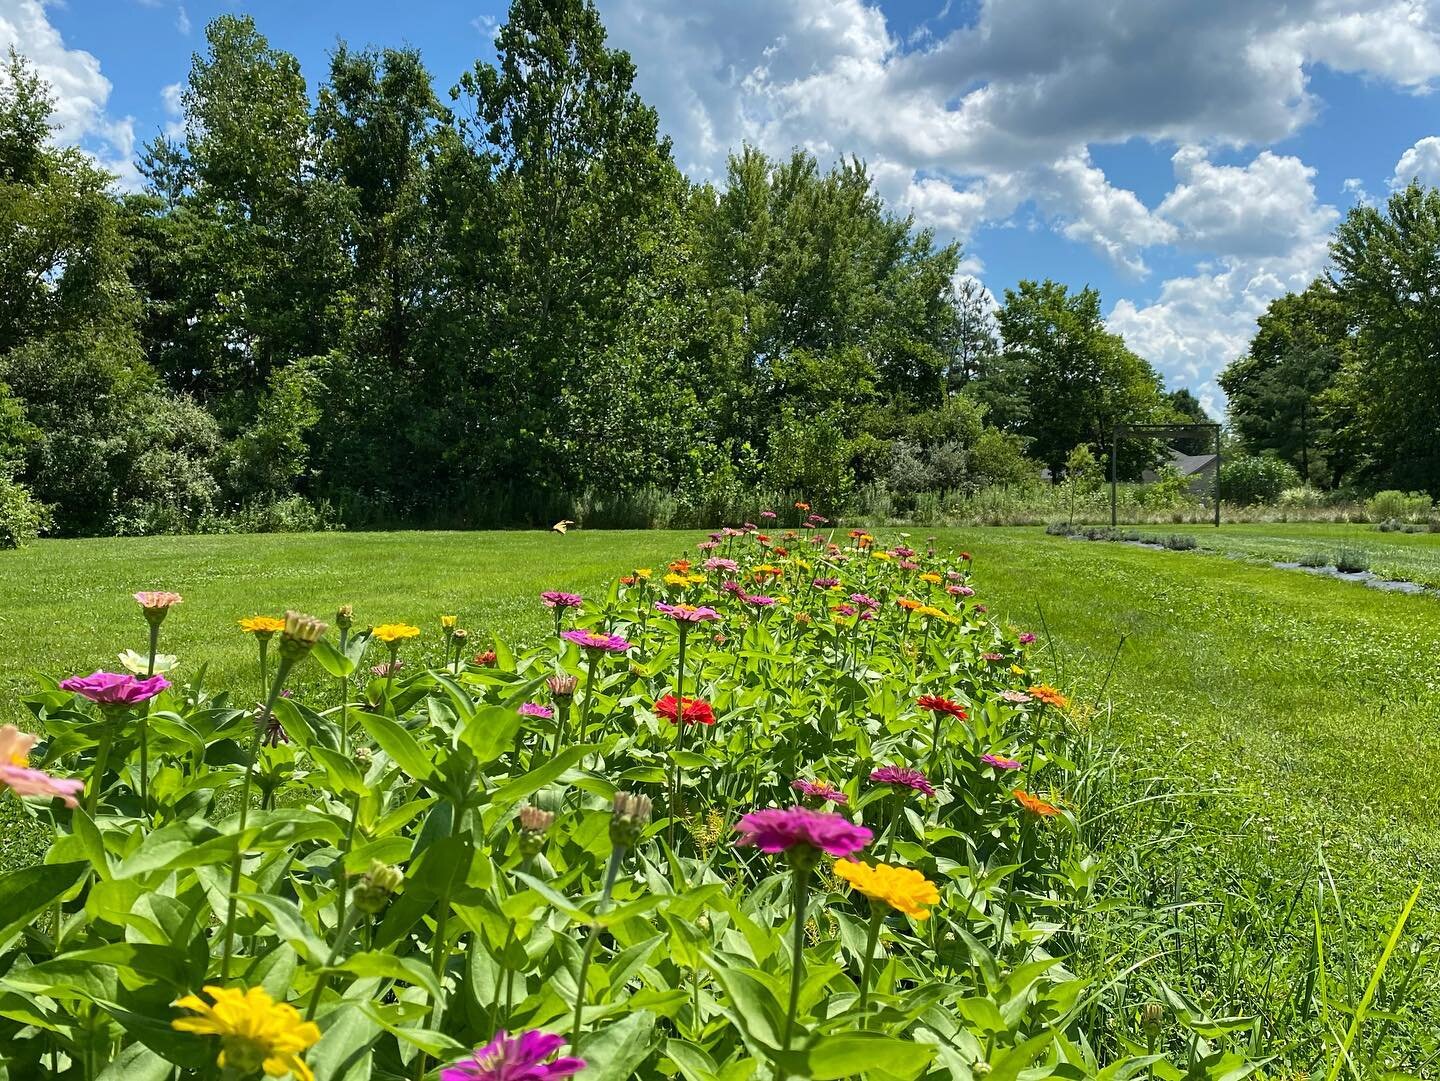 There&rsquo;s more than lavender at Willowfield. Our beautiful zinnias are also in bloom! 🌼
.
.
#willowfieldlavenderfarm #lavender #visitindy #visitmorgancounty #lavenderfarm #zinnias